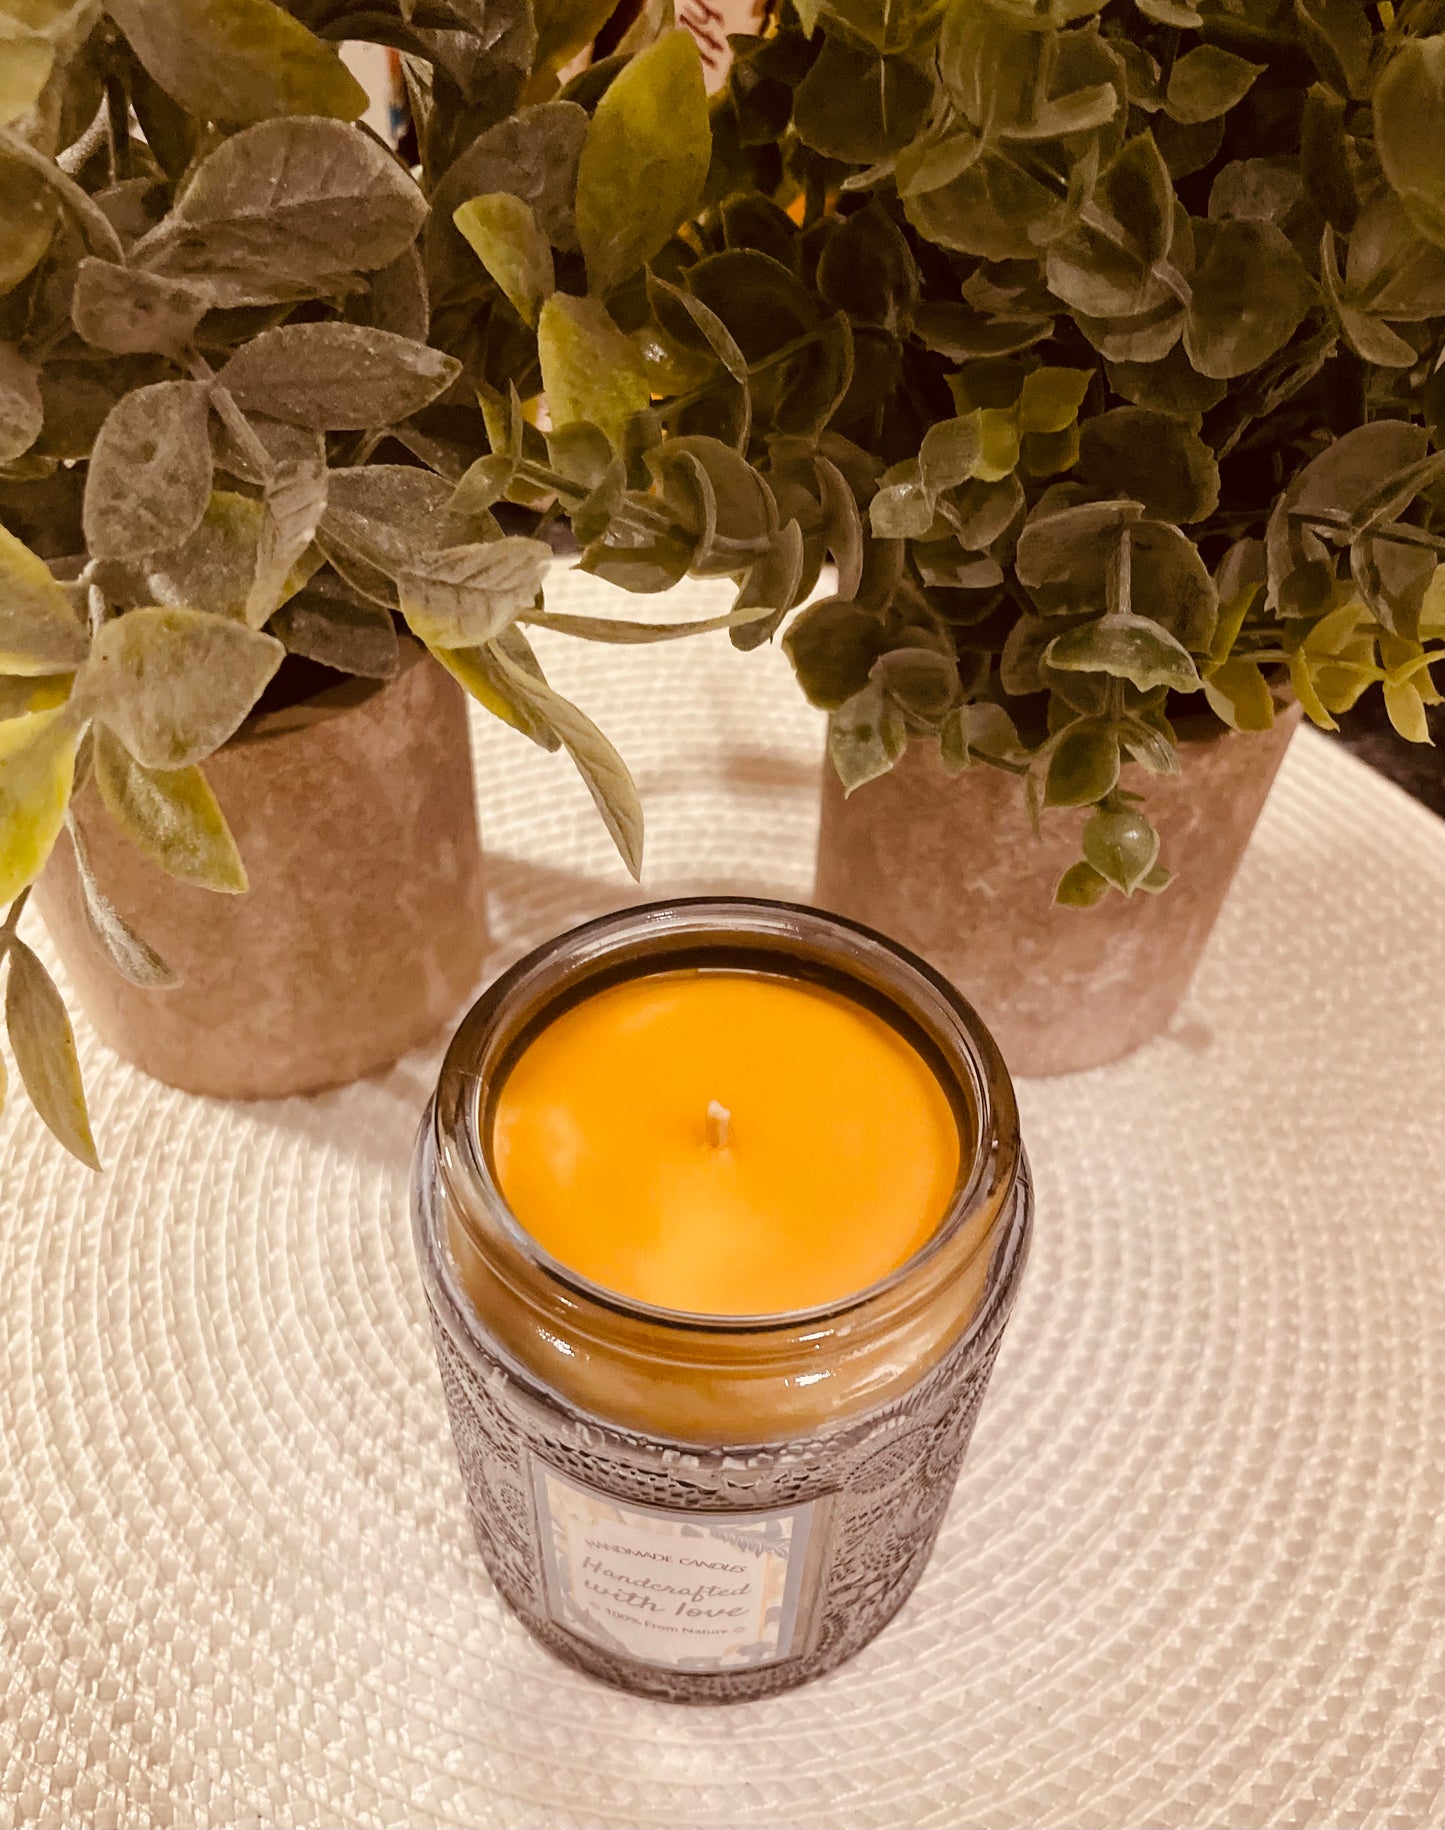 8oz Unscented Beeswax Candle